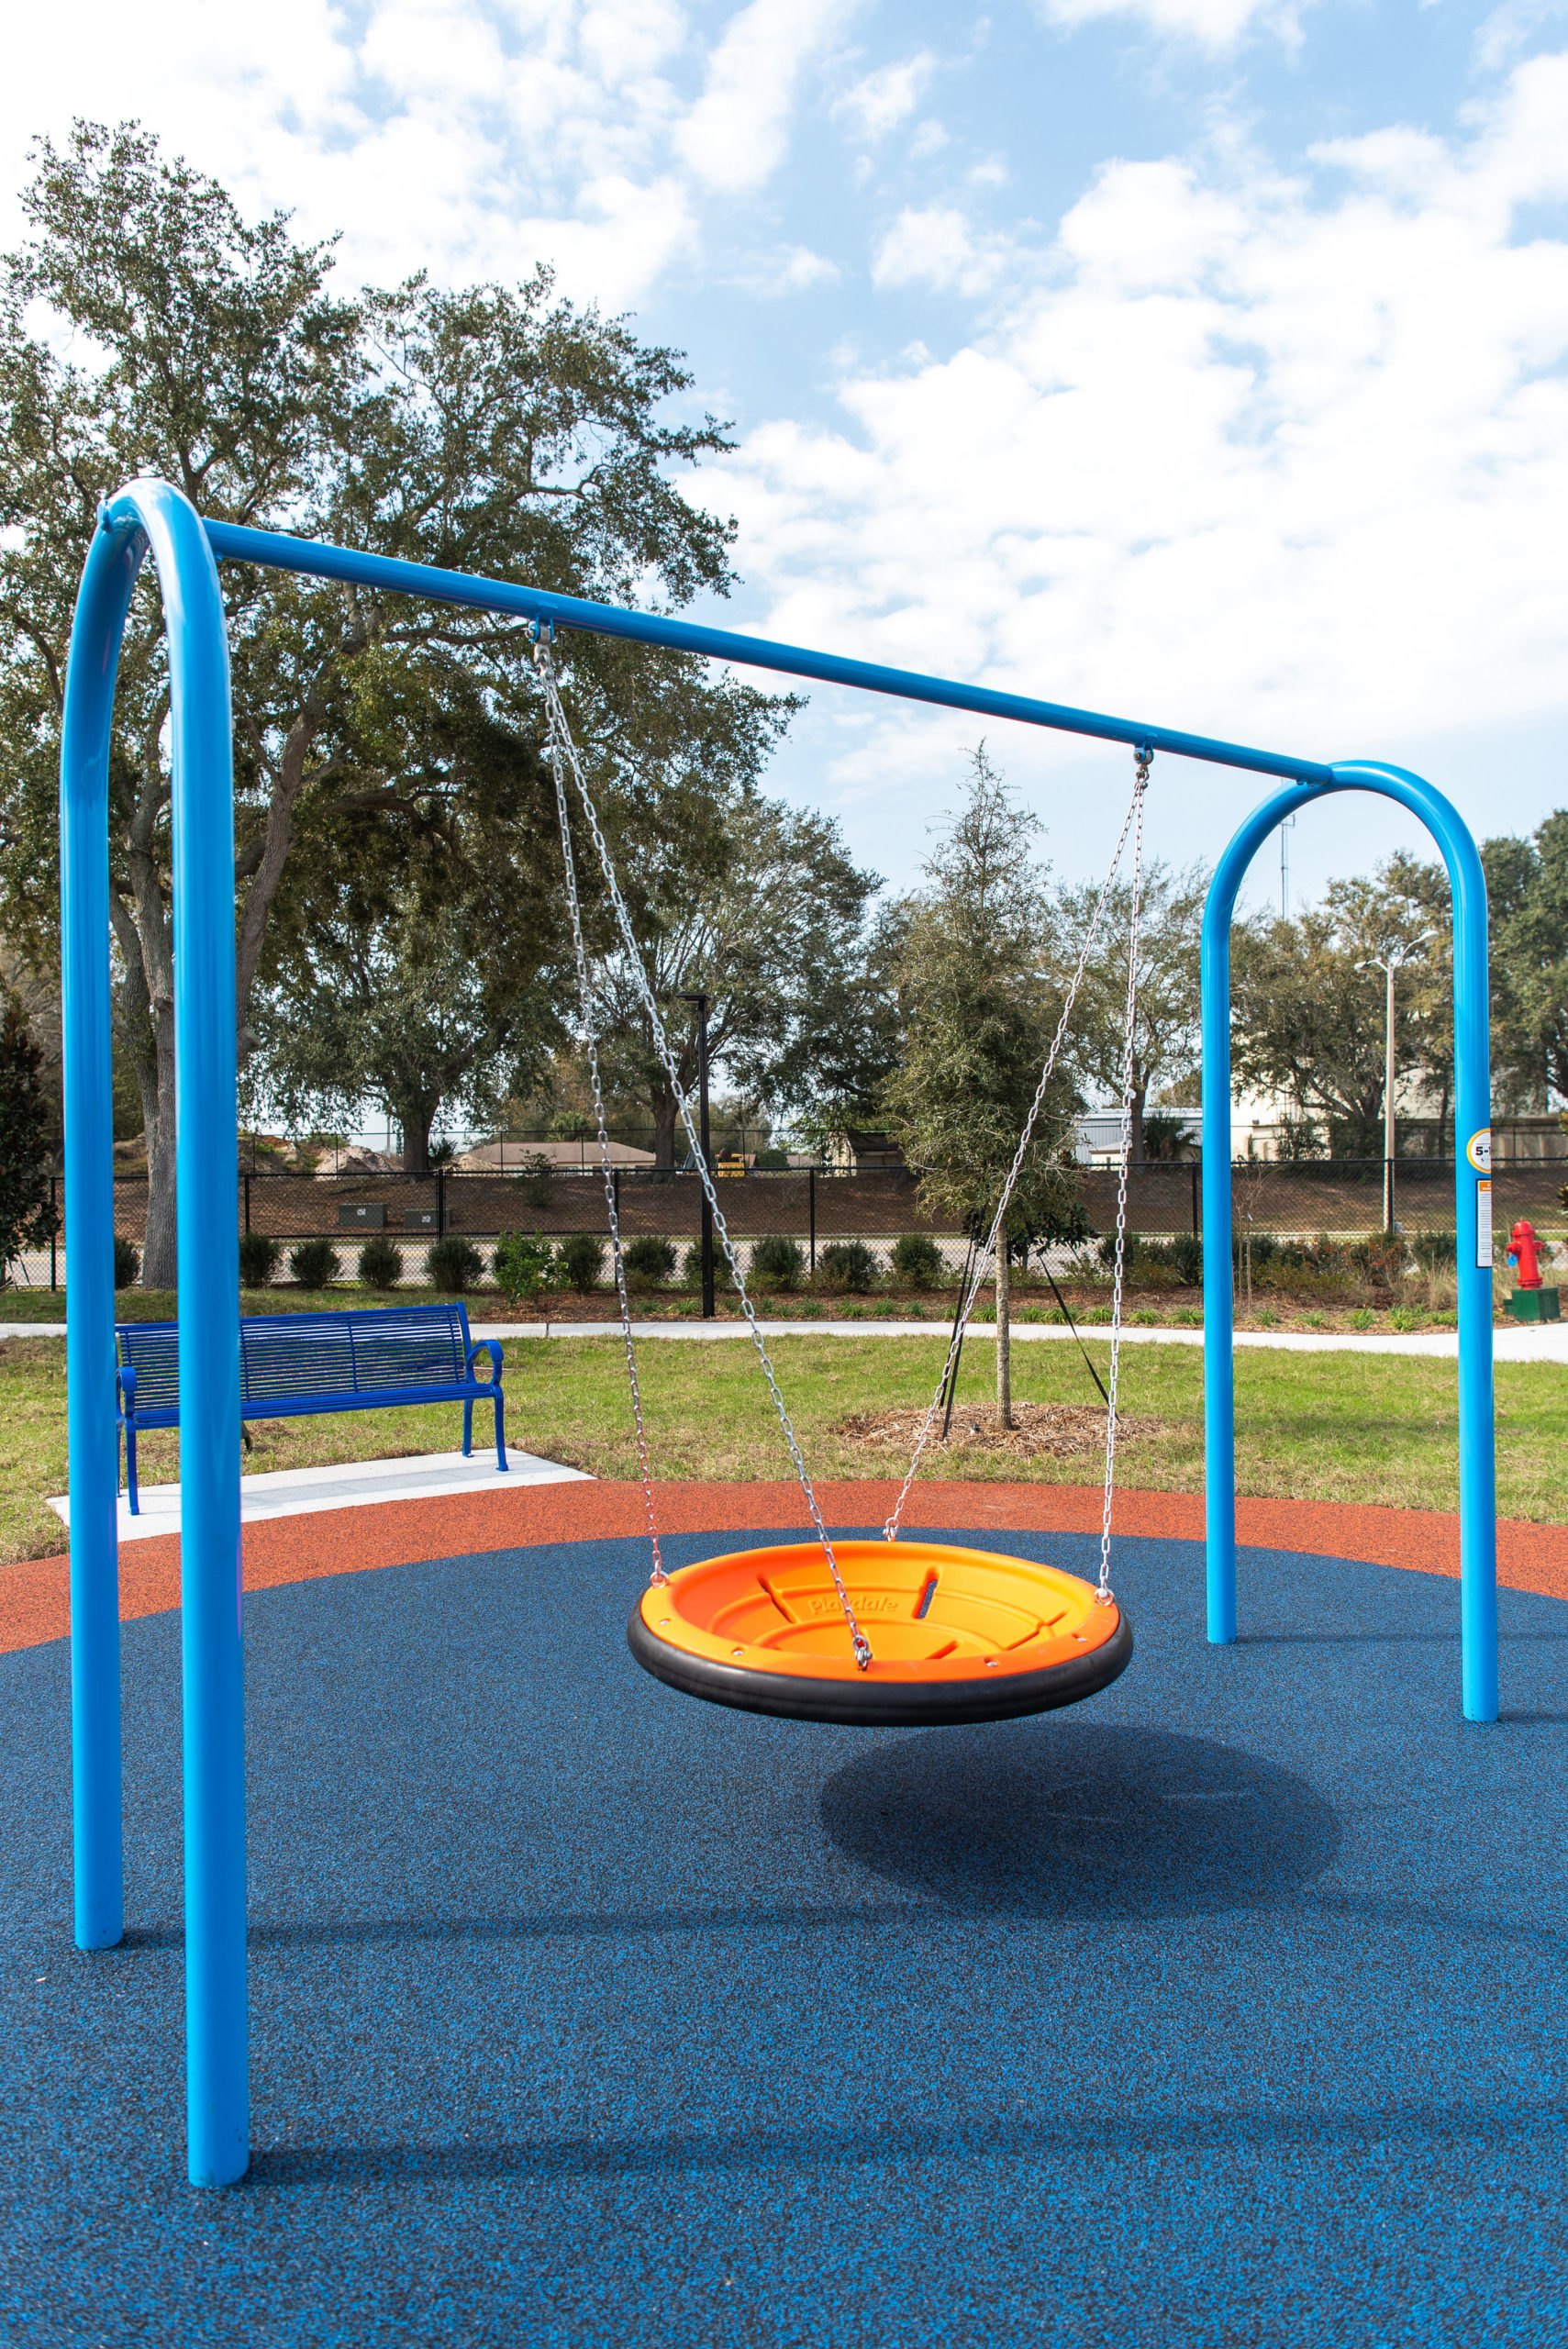 Ping Pong Moves Into Parks and Playgrounds - Goric Marketing Group USA, Inc.